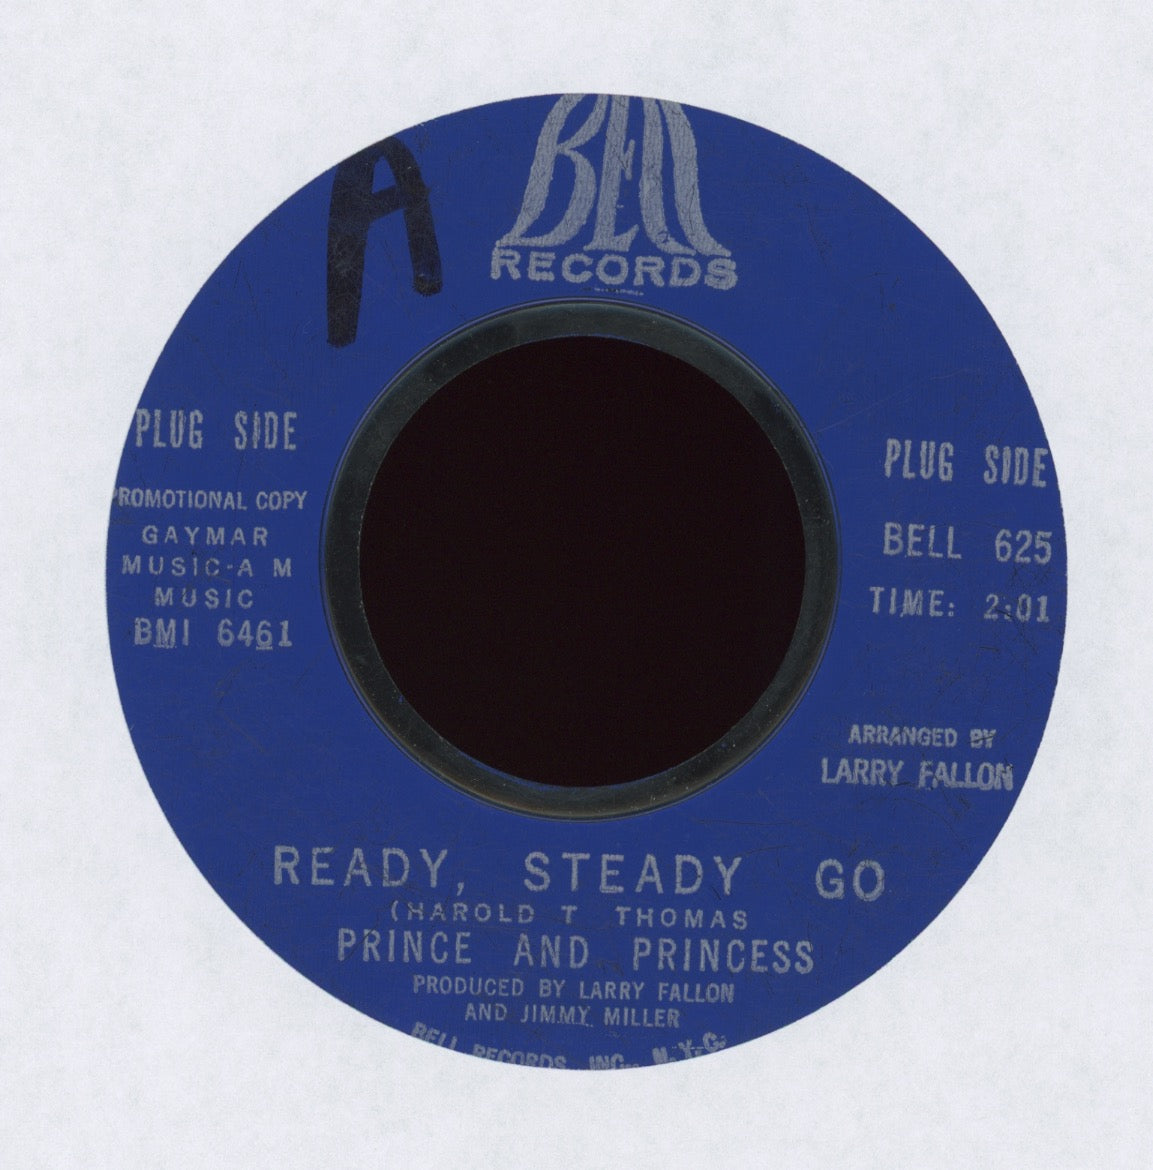 Prince And Princess - Ready, Steady, Go on Bell Promo